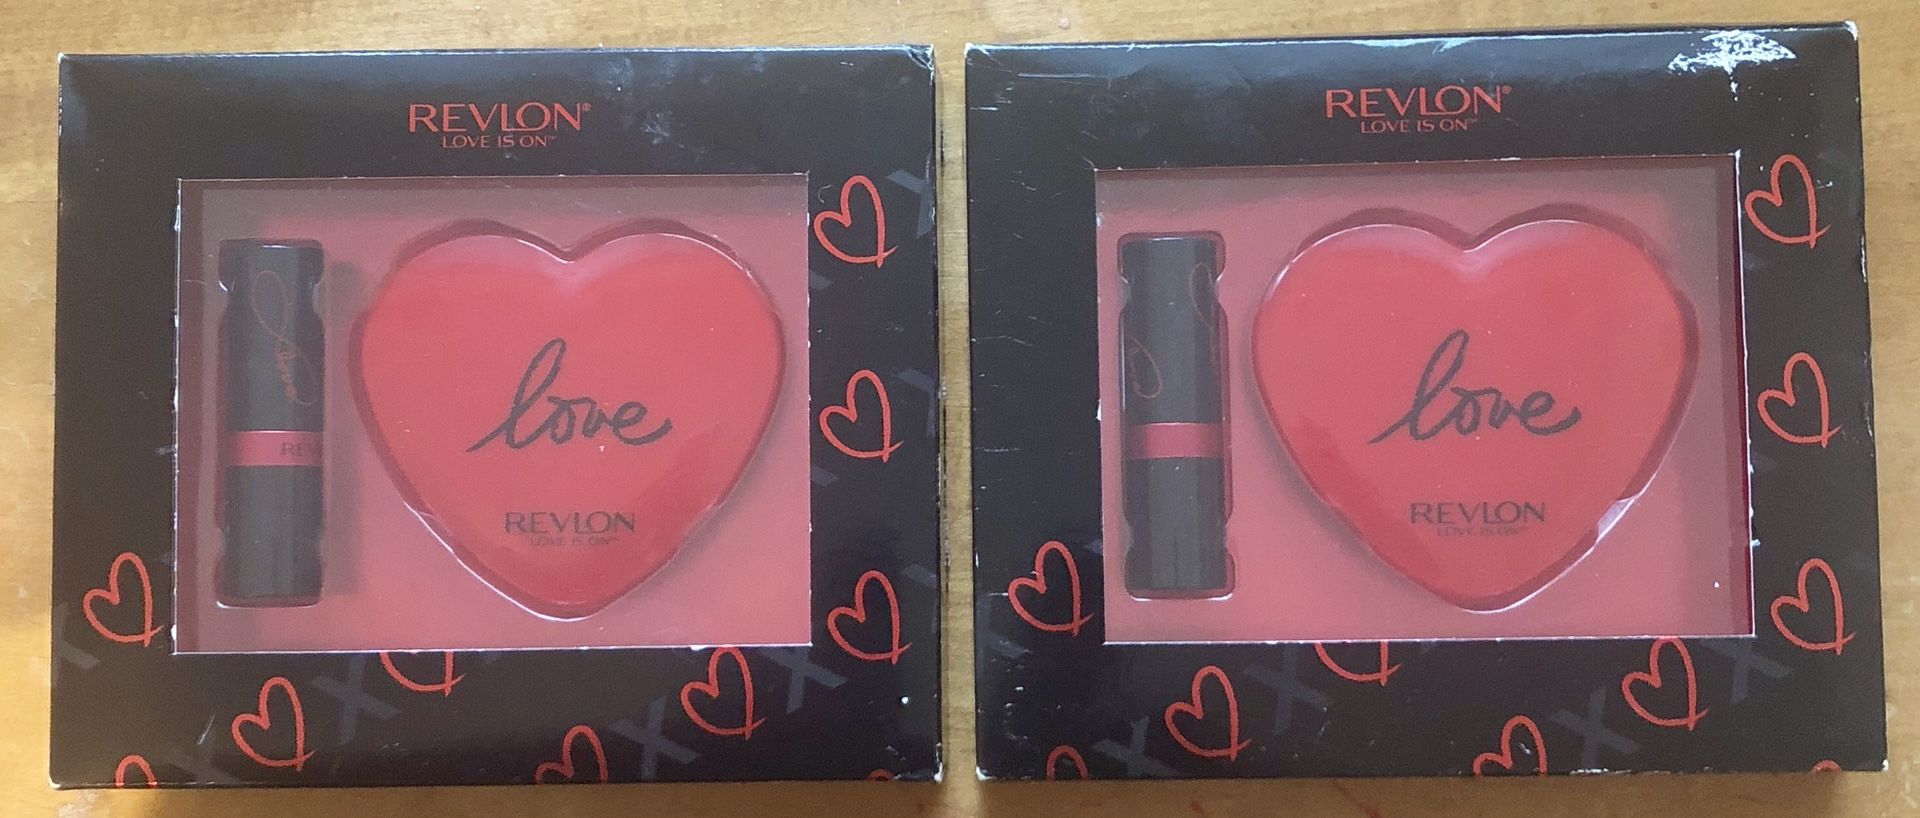 REVLON LOVE IS ON GIFT SET - TWO GIFT SETS